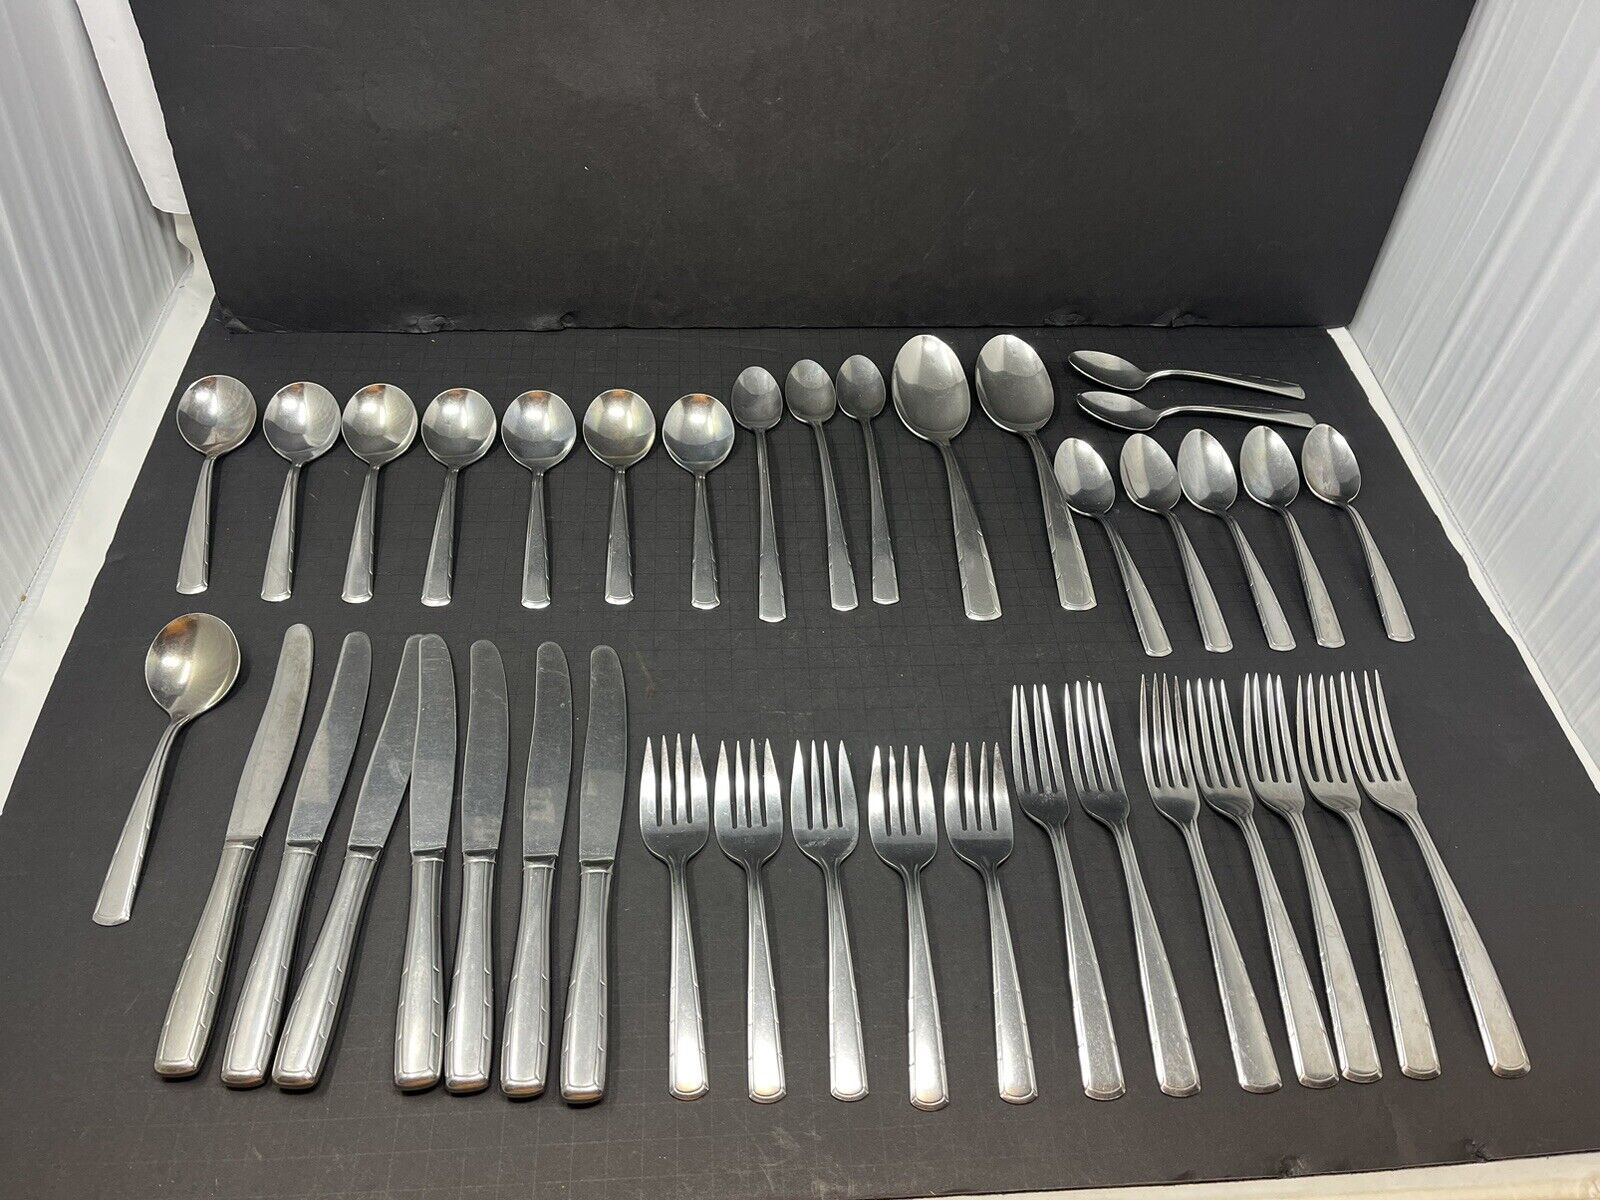 39 PIECES STAINLESS FLATWARE BY IMPERIAL USA FORK TEASPOON Soup